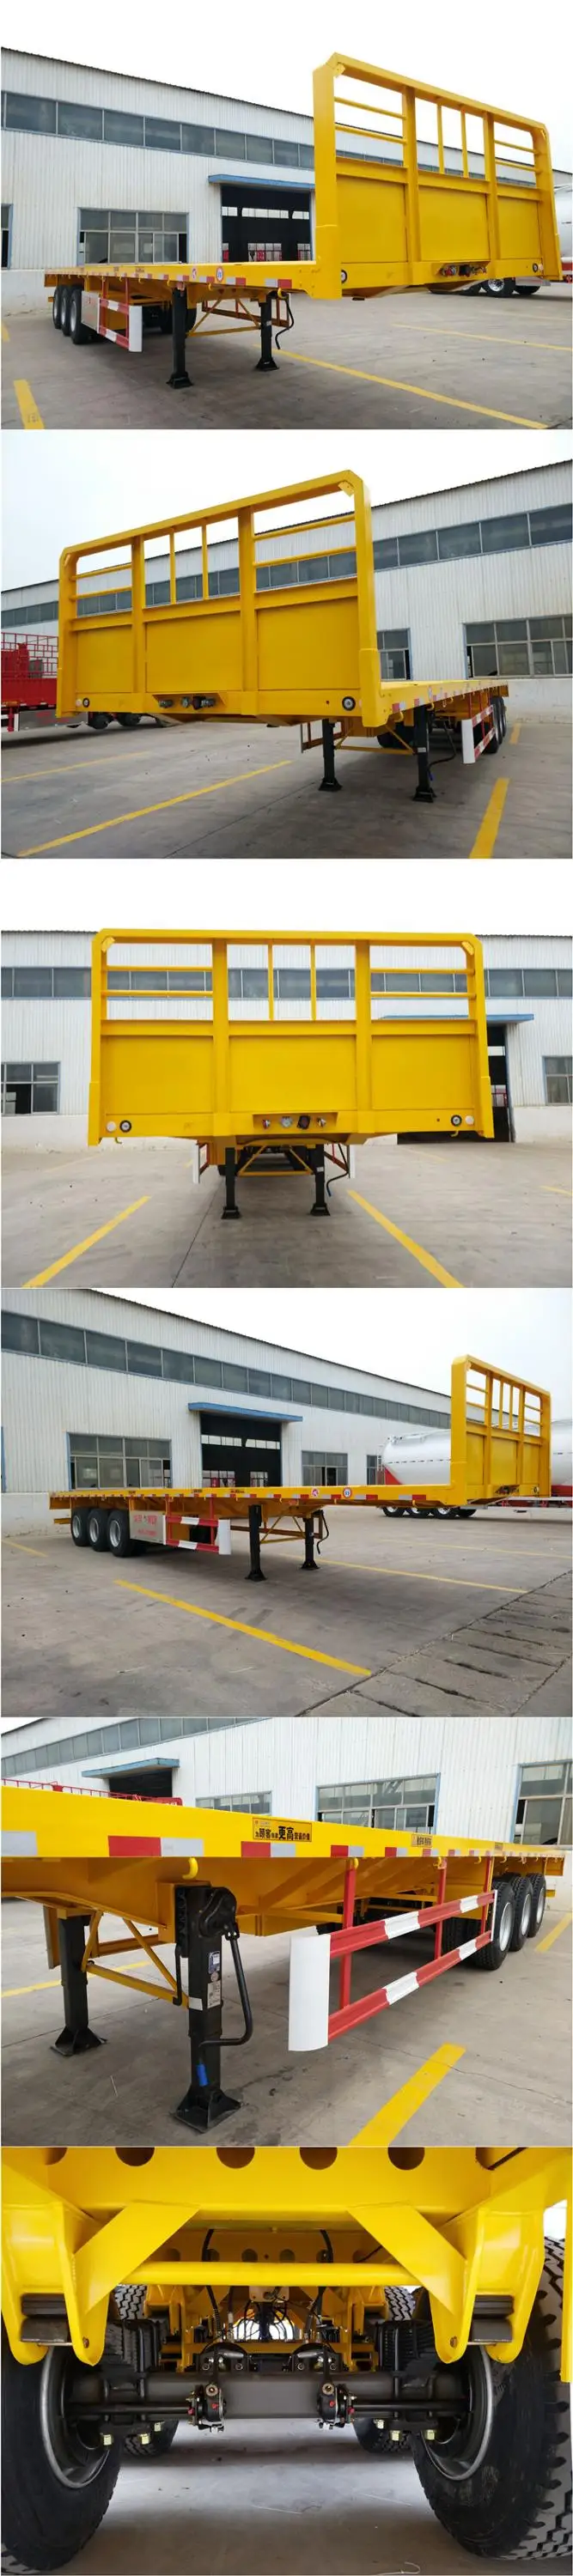 China Manufacturer 40FT Flatbed Container Semi Trailer/Truck Trailer